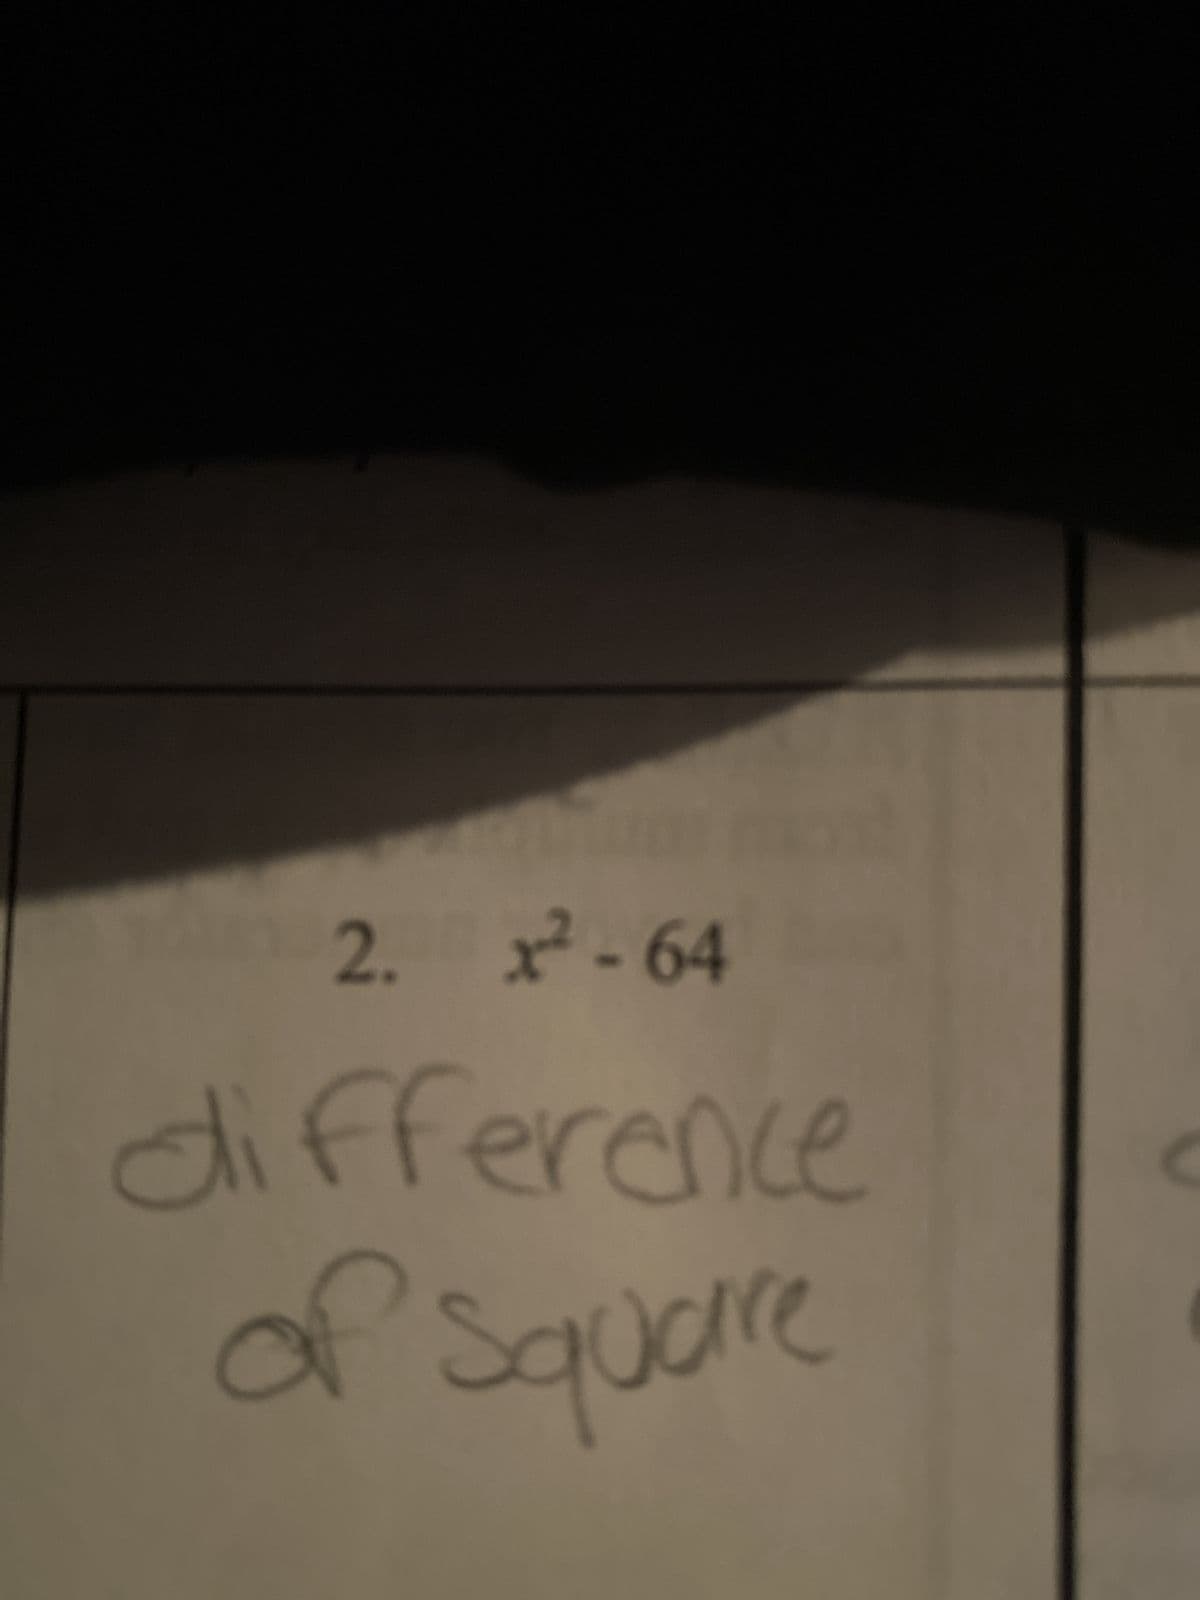 2.
2. x²-64
difference
of square